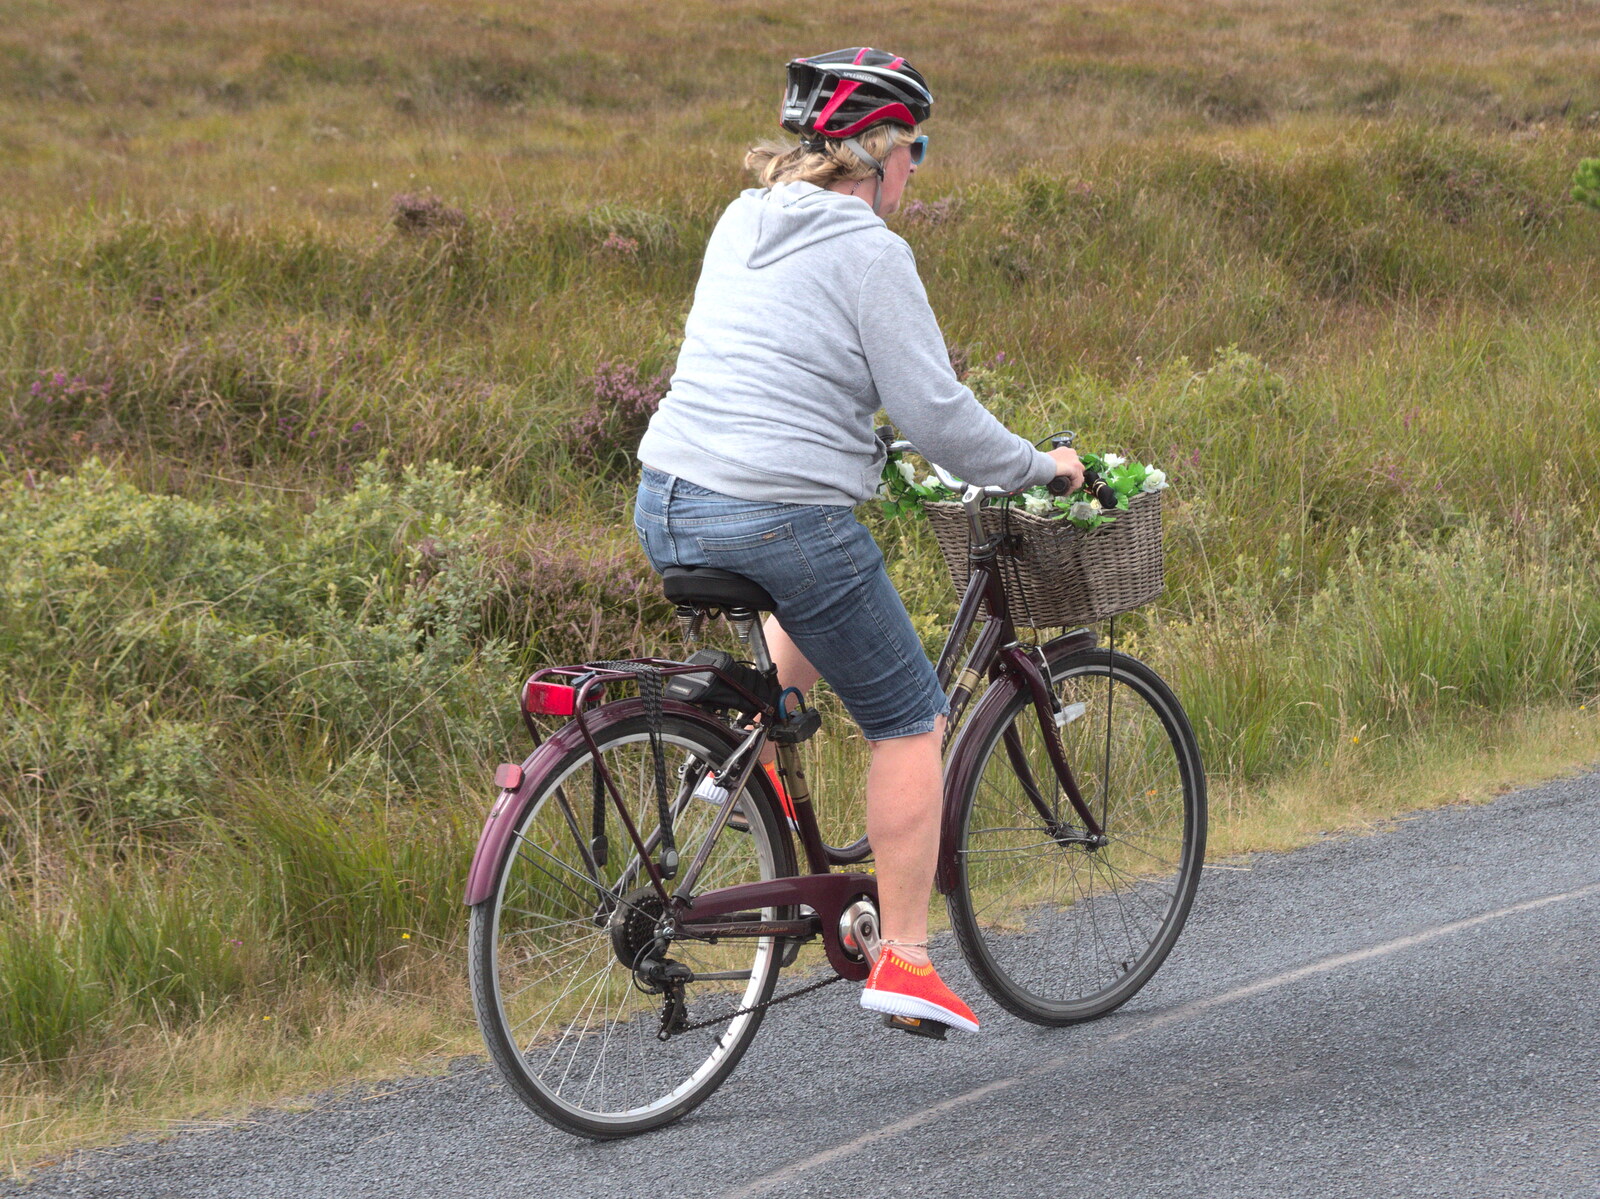 Random cyclist with a basket full of flowers from A Bike Ride to Mulranny, County Mayo, Ireland - 9th August 2017